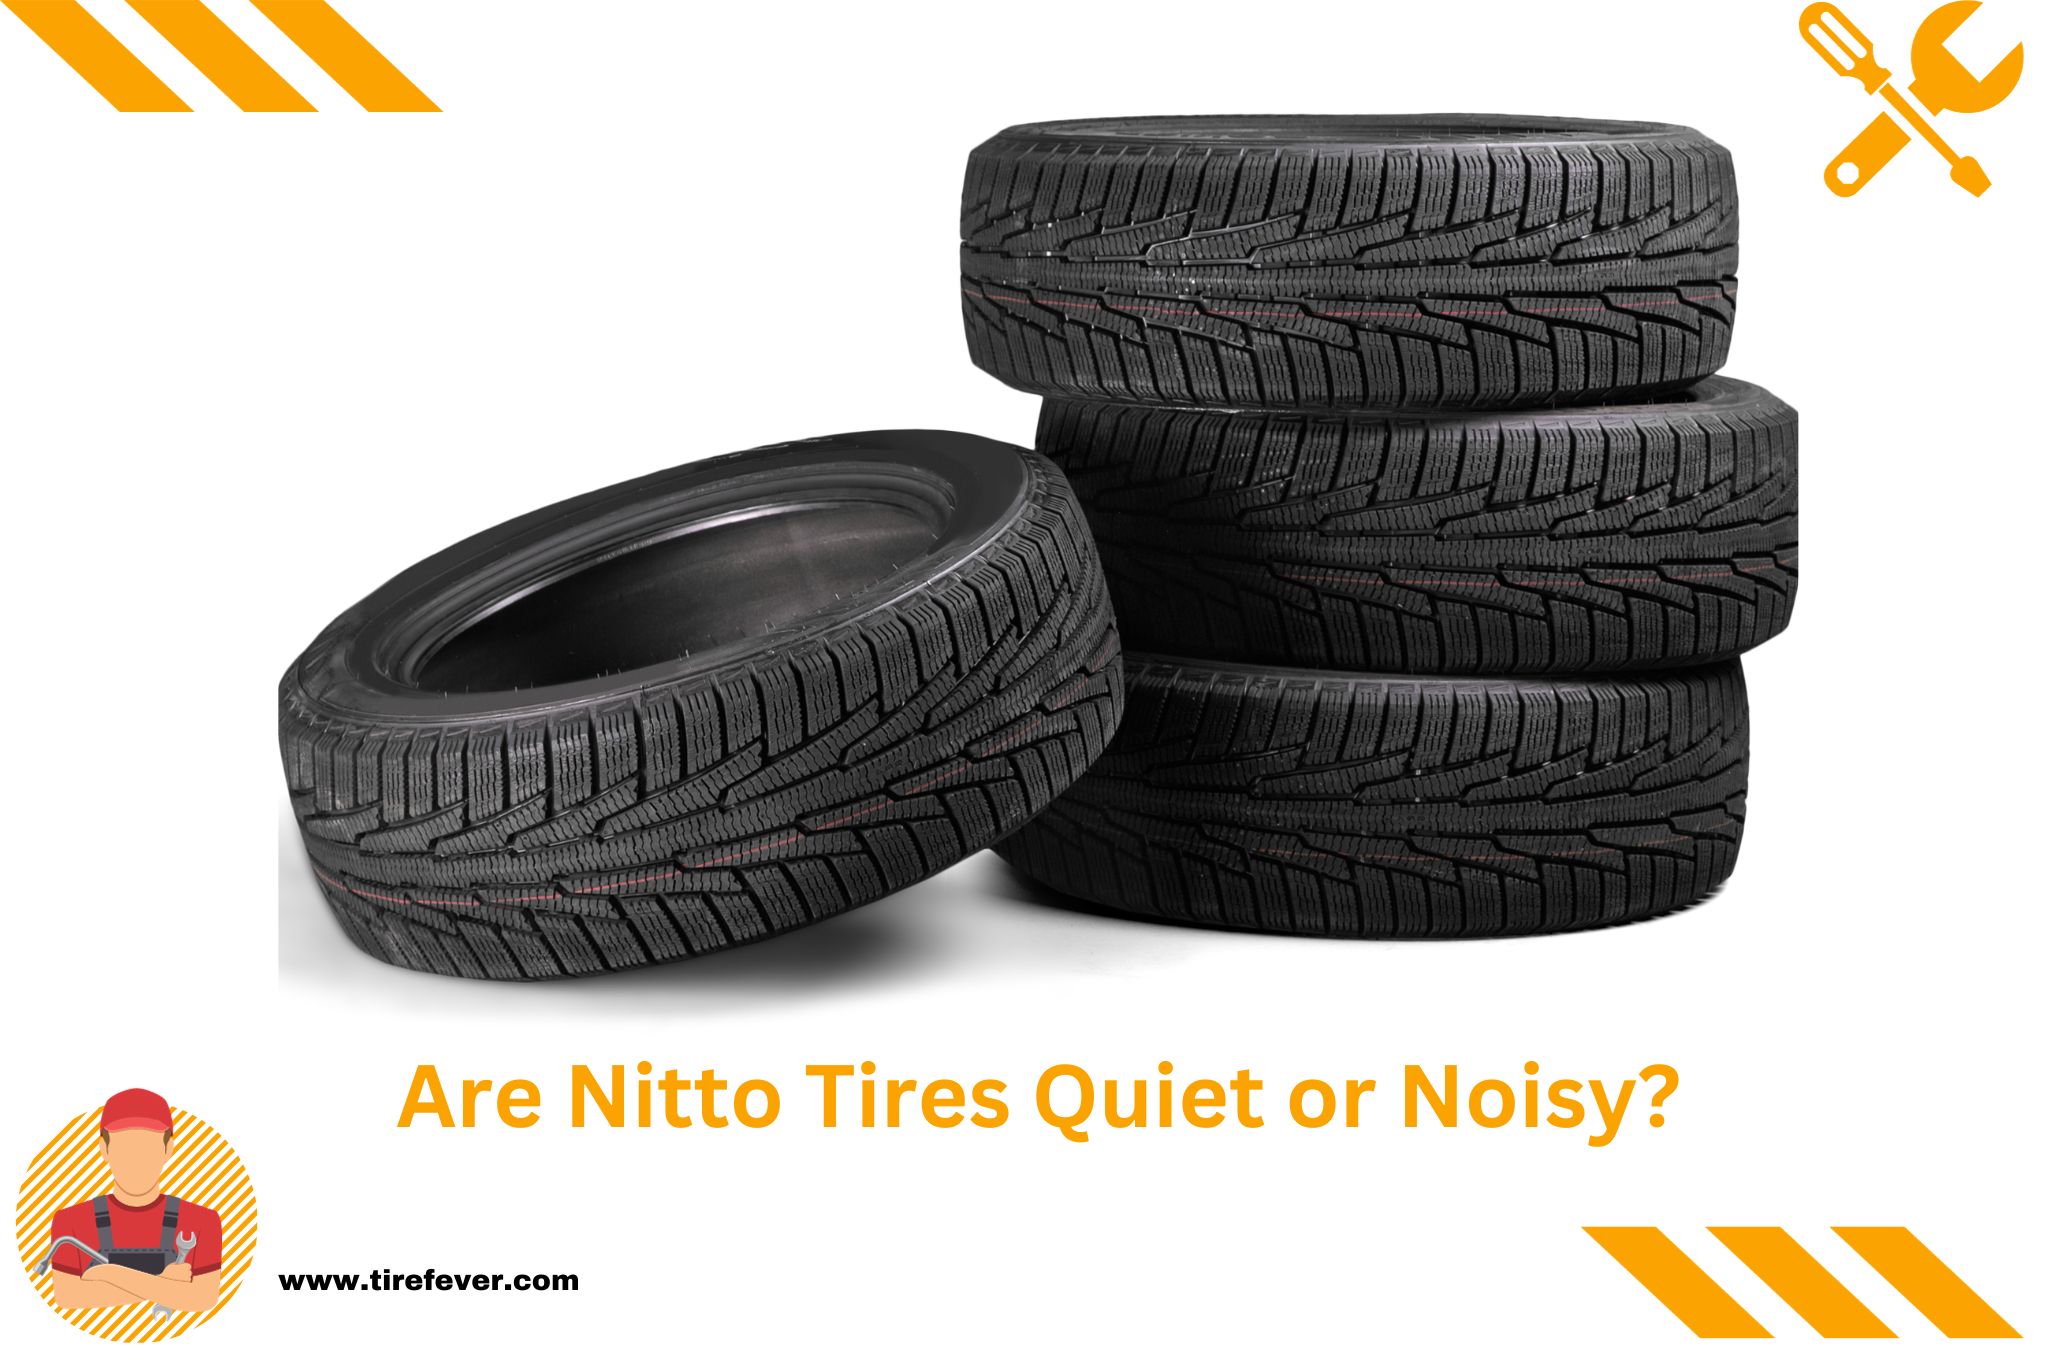 Are Nitto Tires Quiet or Noisy?